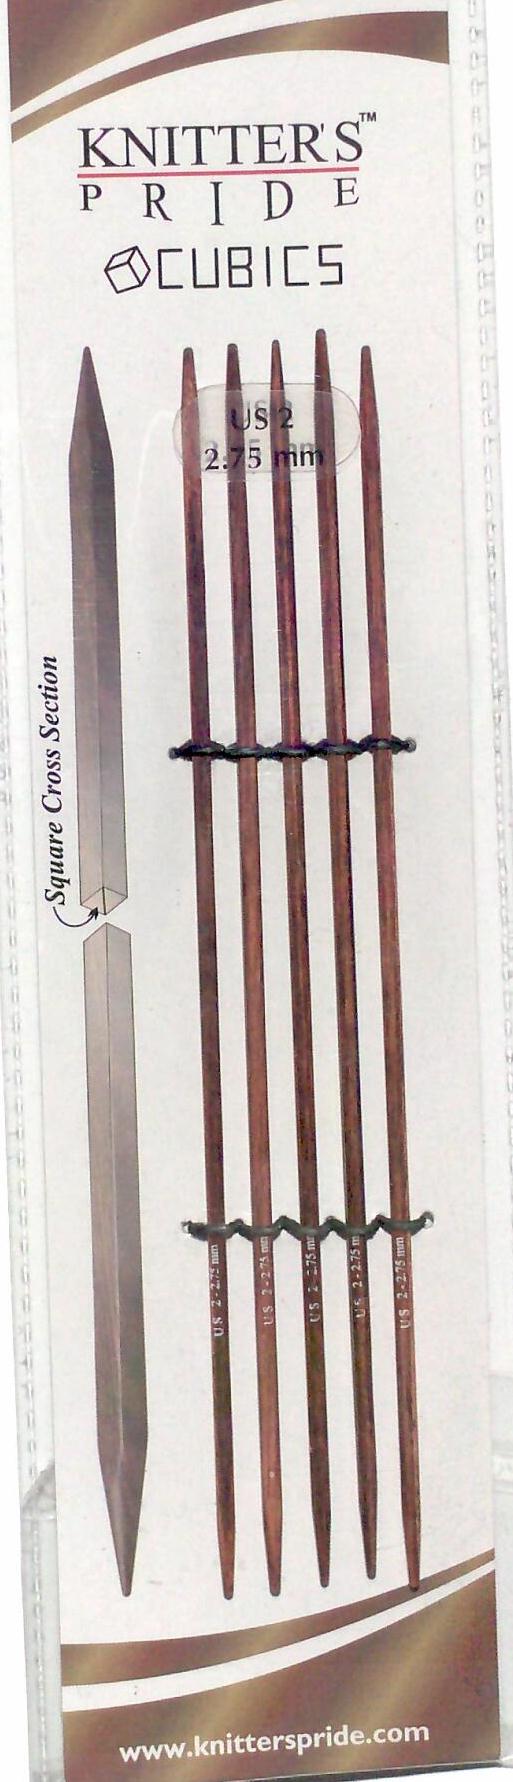 Knitter's Pride 06"/15 cm 3.00 mm/US 2.5 Rosewood Cubics Double Point Needles